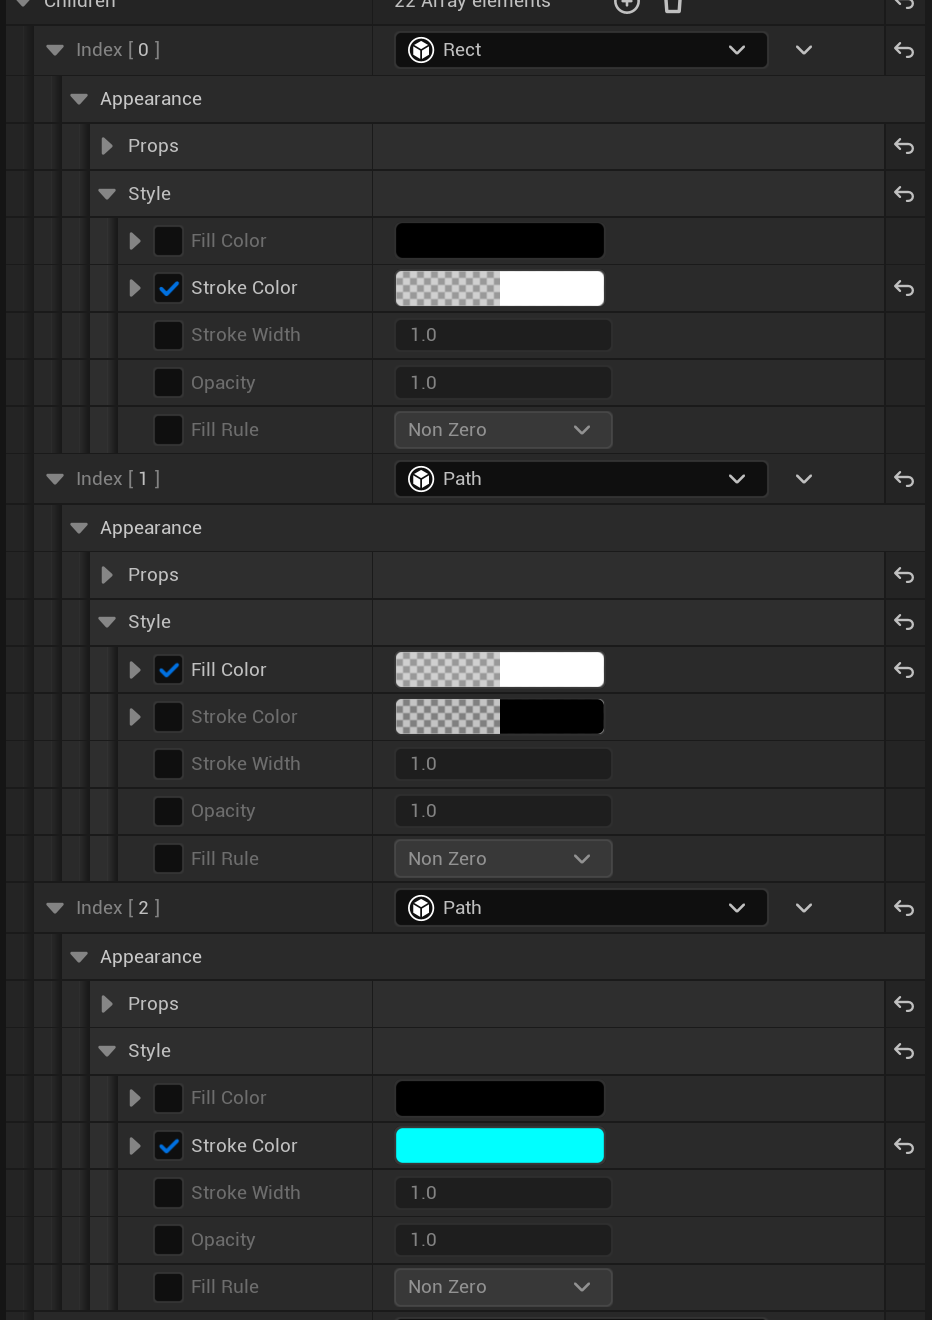 Screenshot of the Unreal Editor showing our SVG Style properties rendered in the Details panel. Each property is shown with a checkbox in front of the property name. The checkbox is checked for any properties which have been set explicitly, while fields that are left at their default values are grayed out, with unchecked boxes.